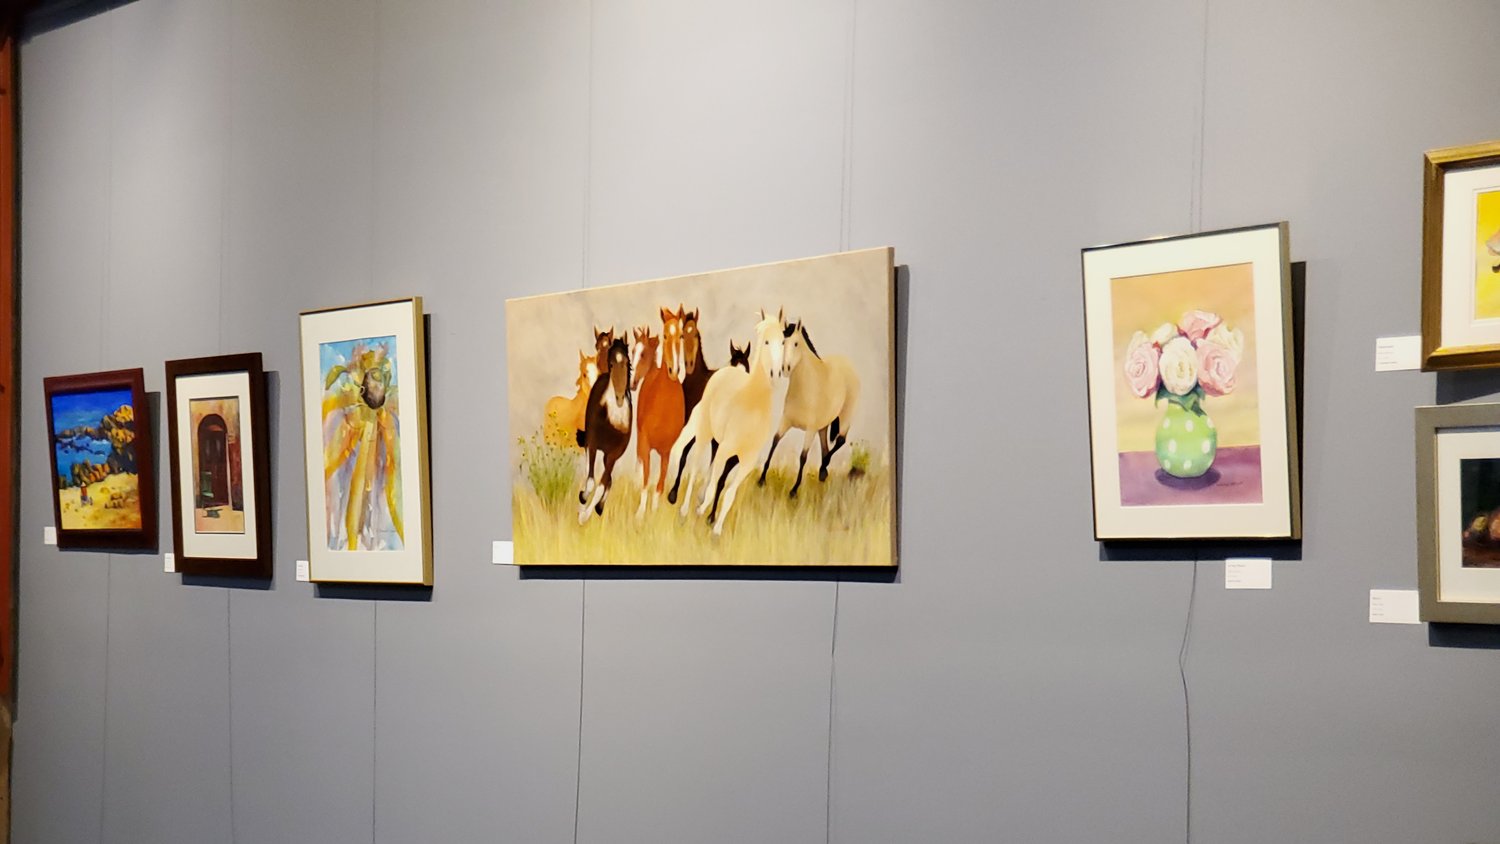 Various works of art in the Featured Artist Gallery.